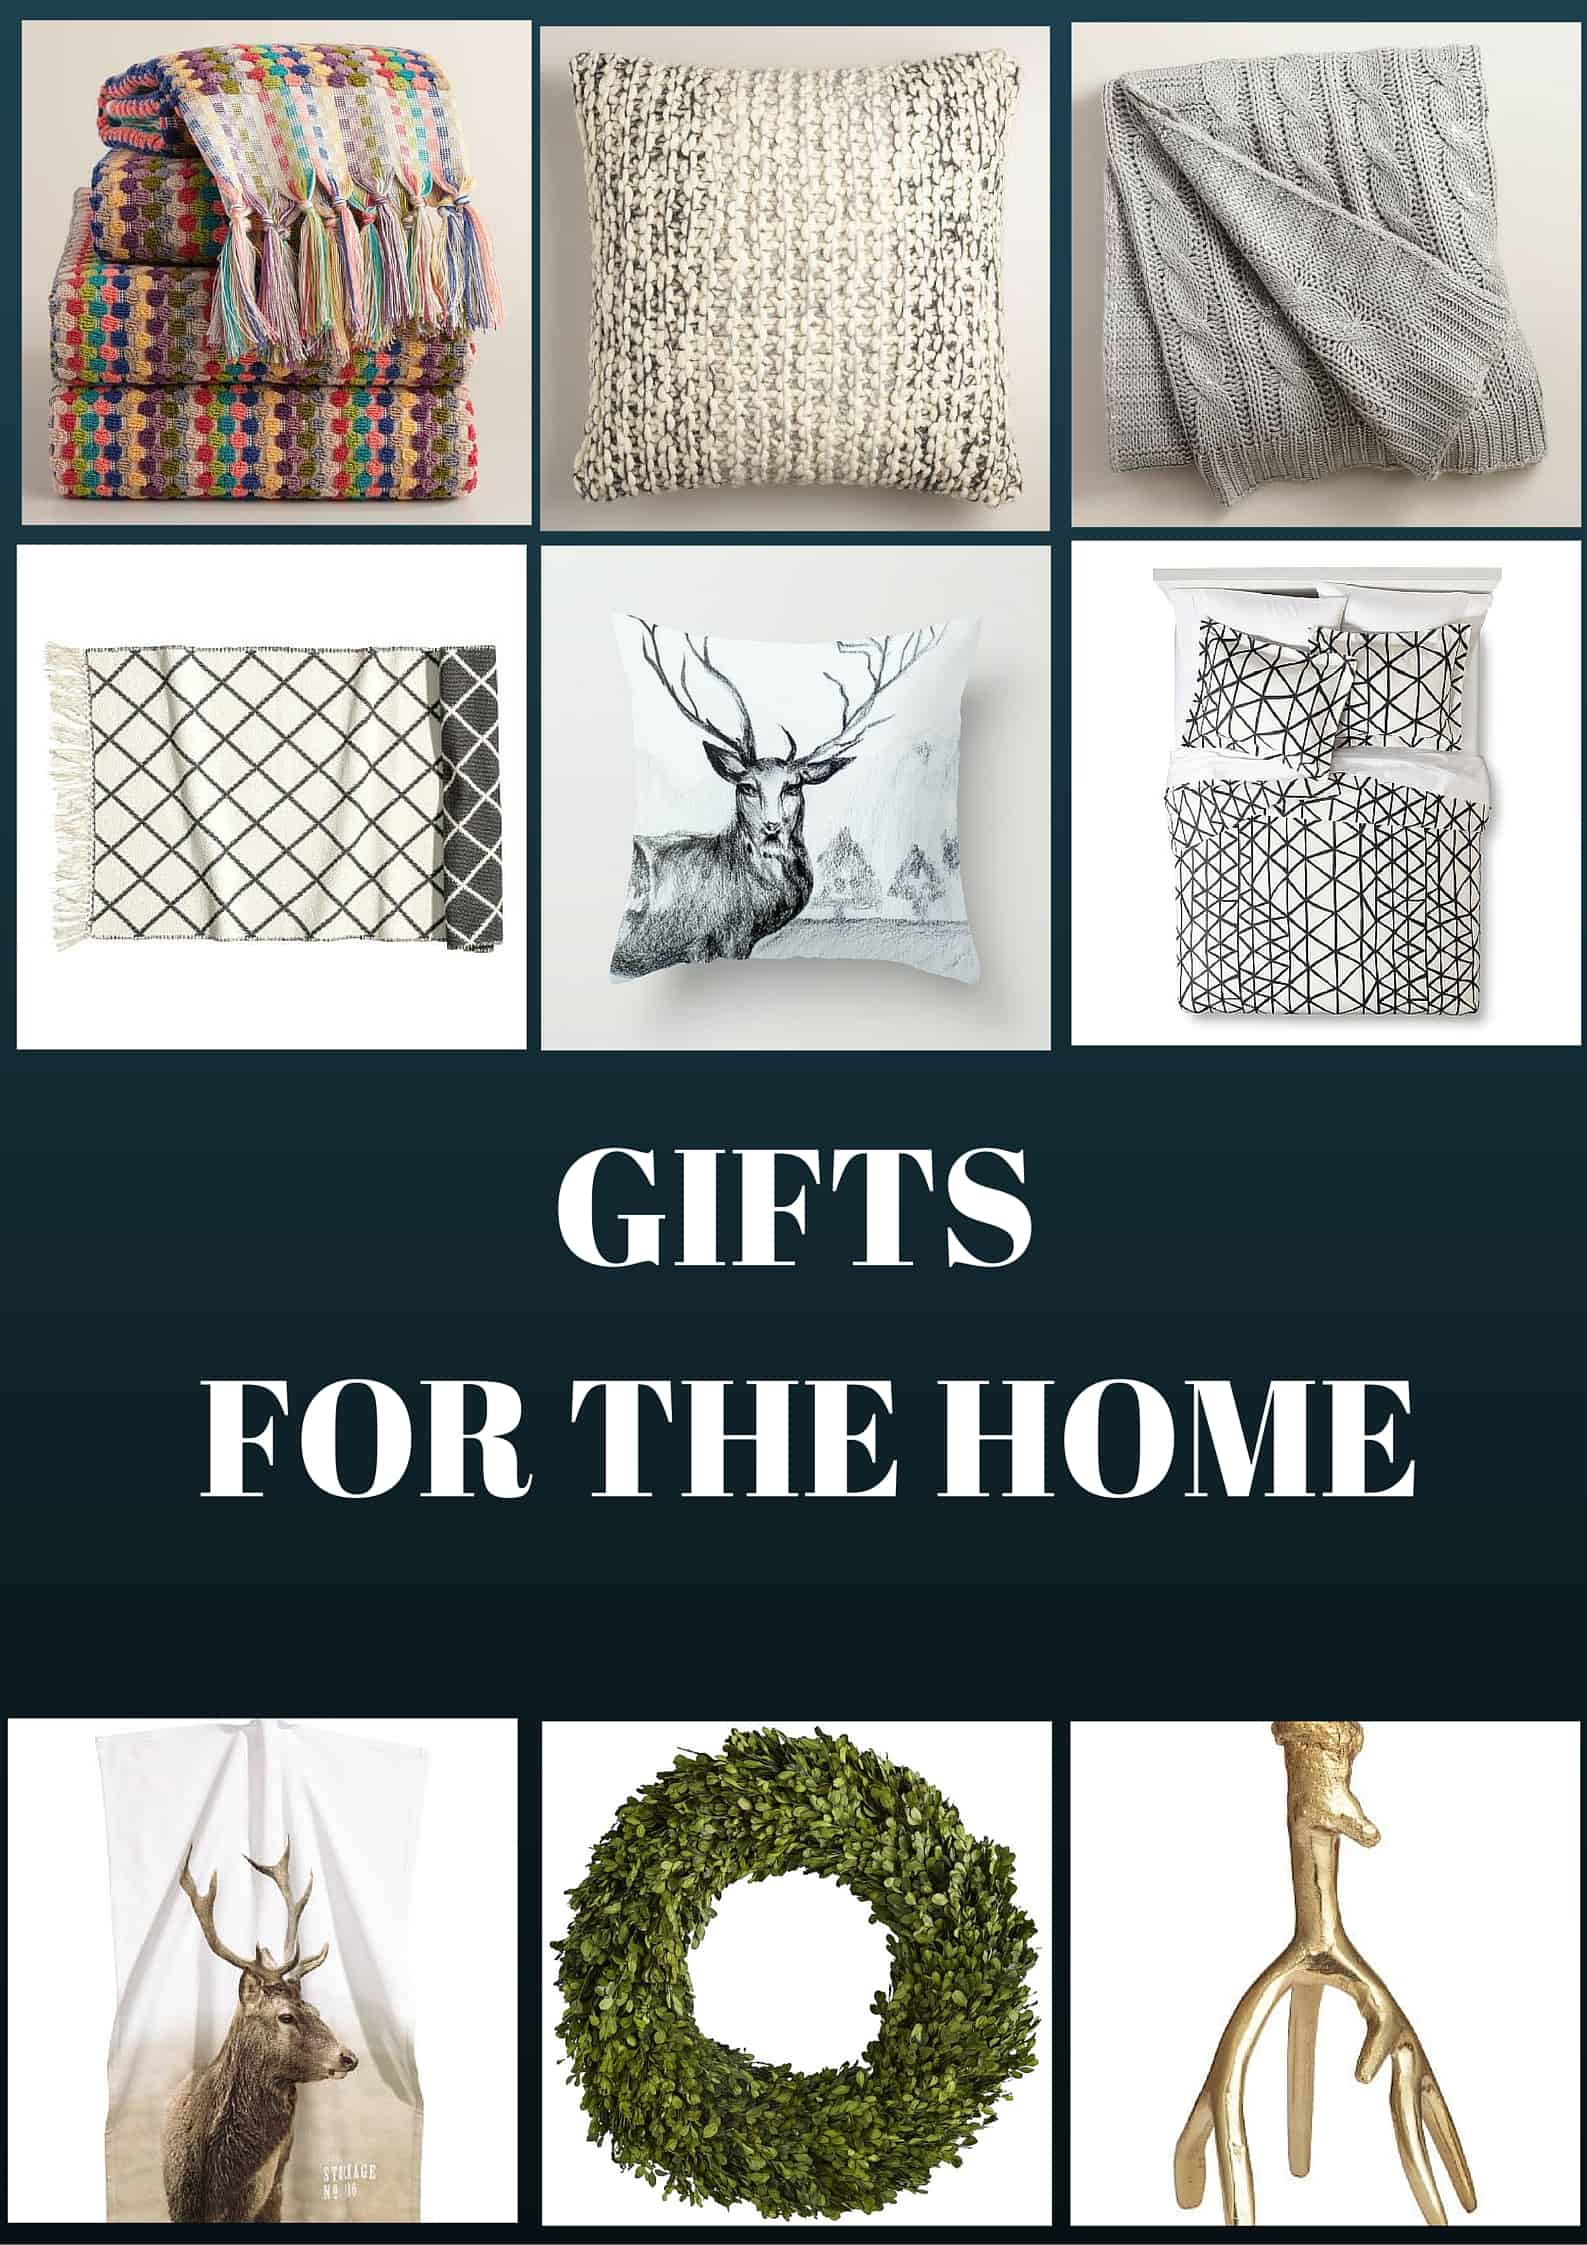 GIFTS FOR THE HOME